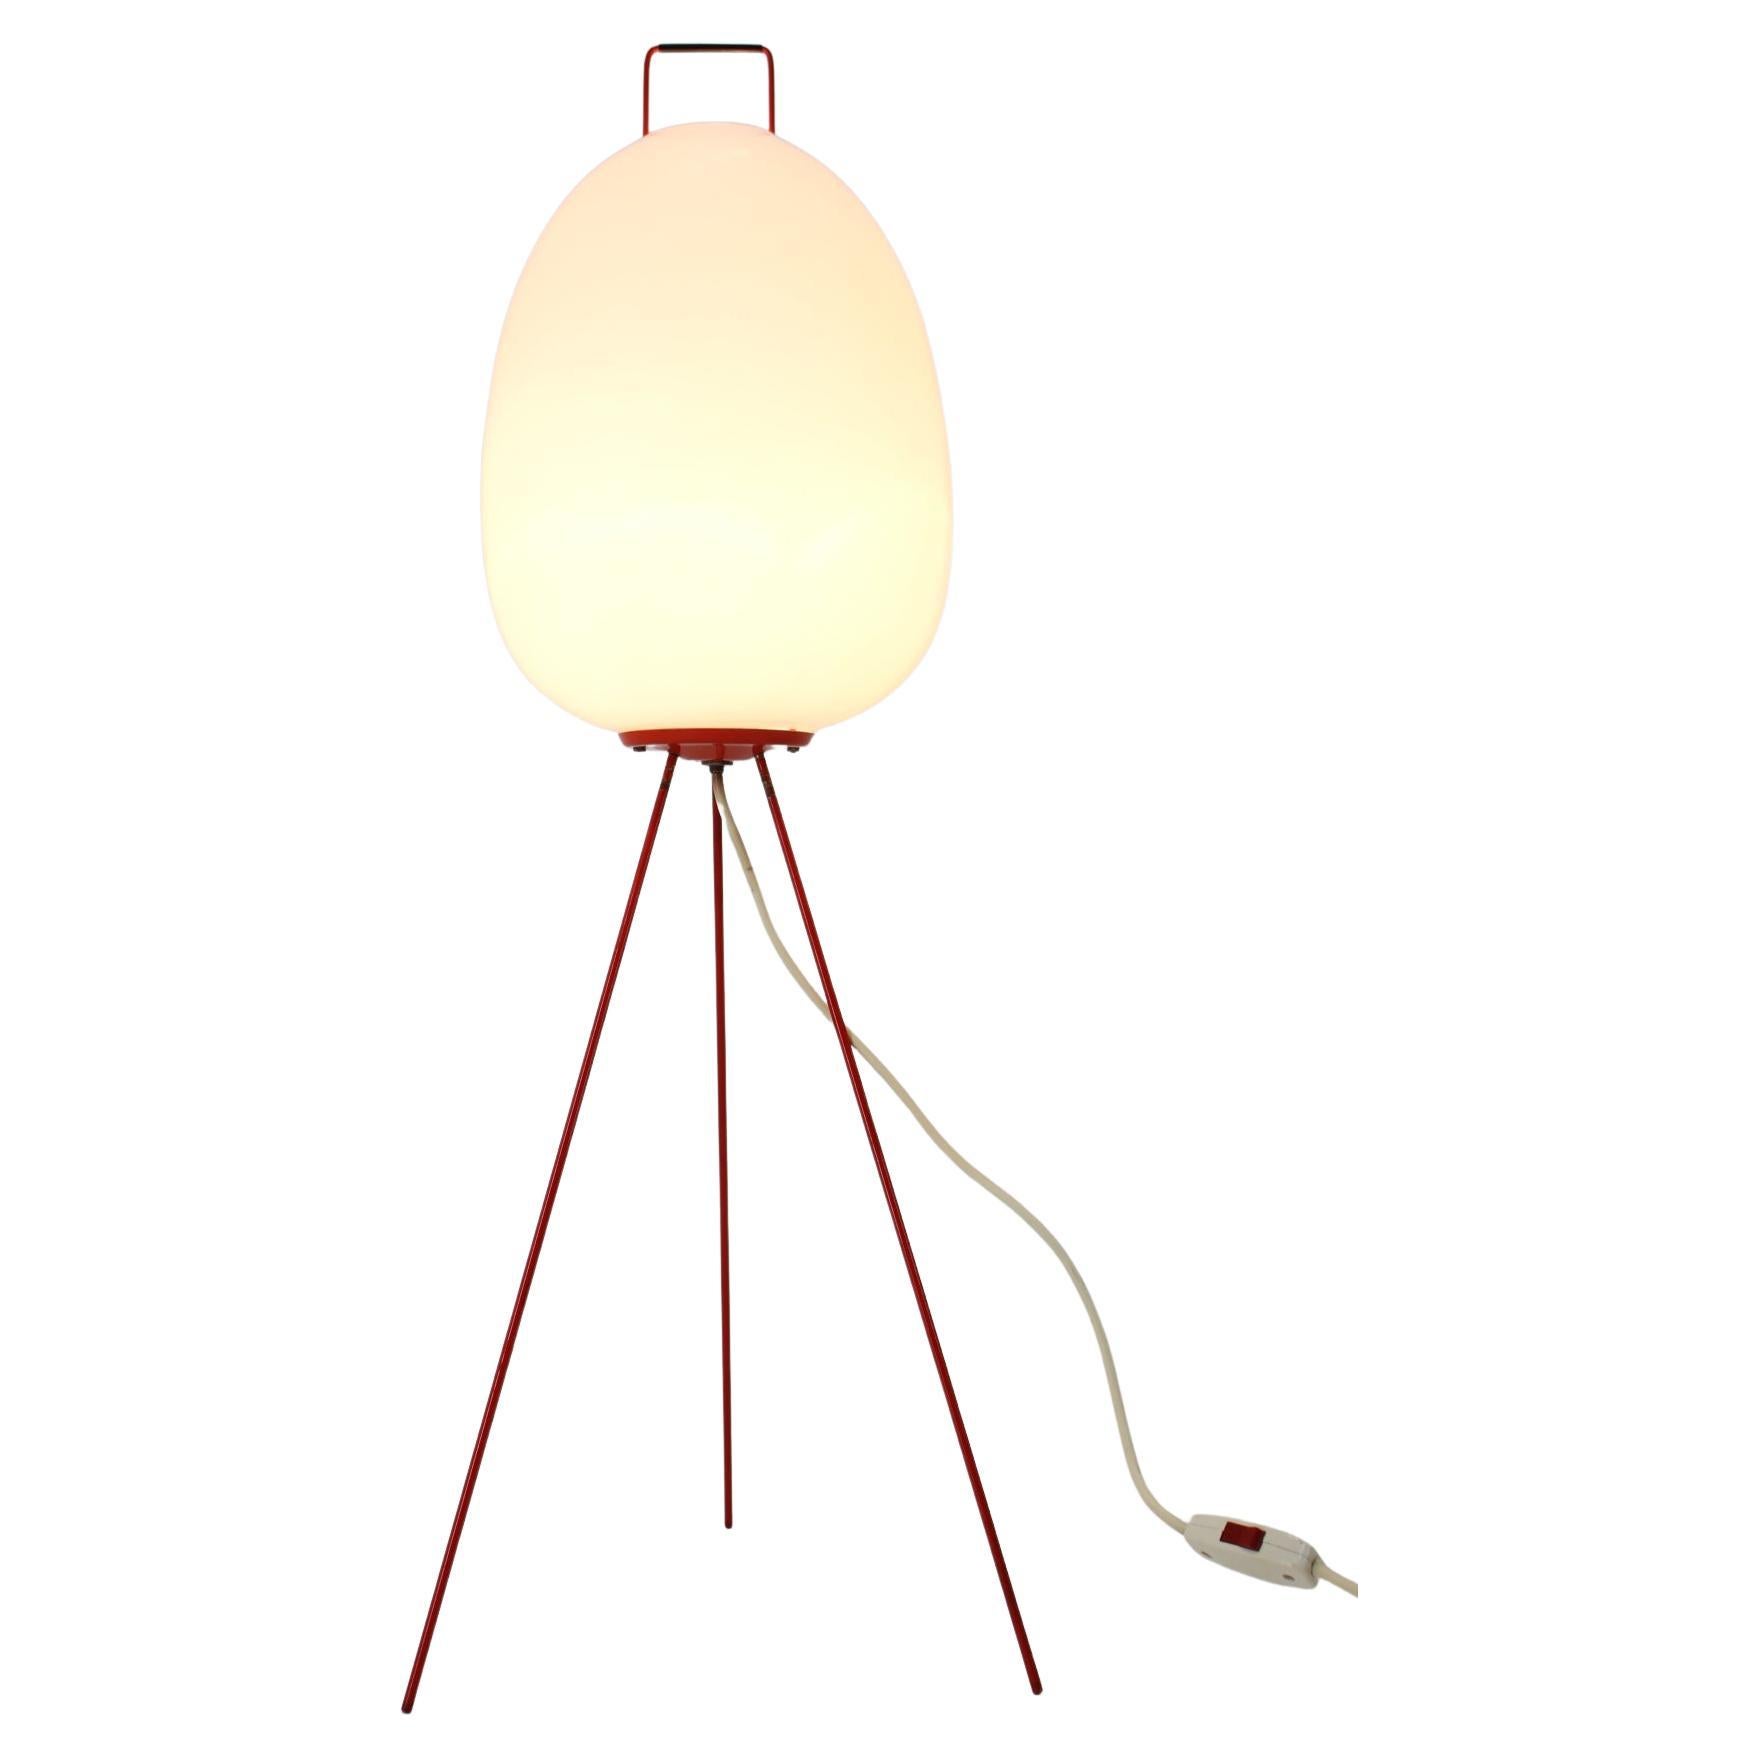 Very Rare Space Age Floor Lamp "Egg" by Josef Hůrka, 1960s For Sale